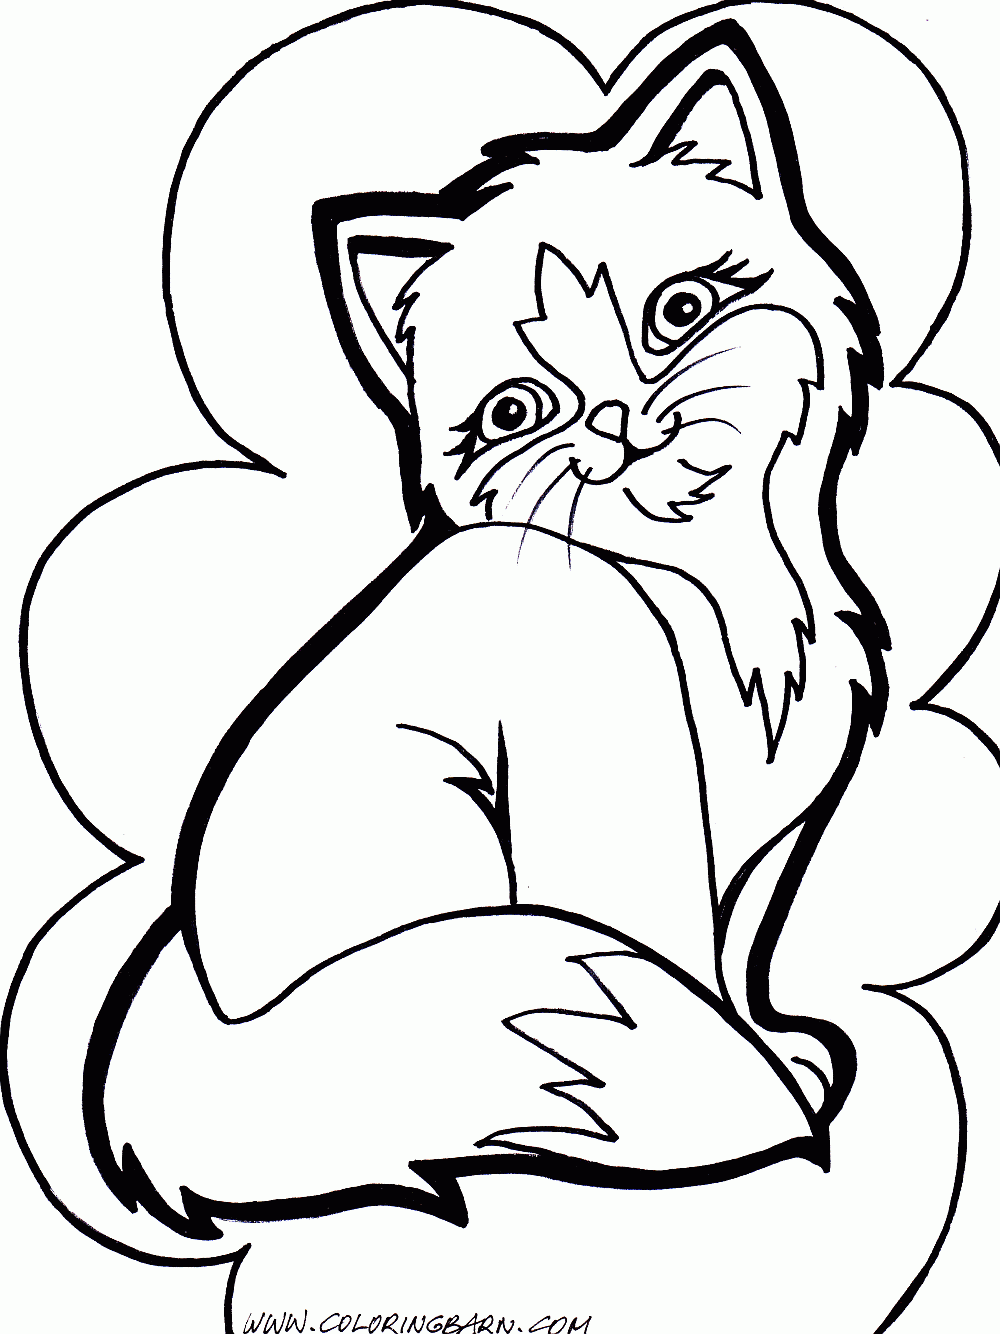 Download Three Little Kittens Coloring Sheet Kittens Coloring ...